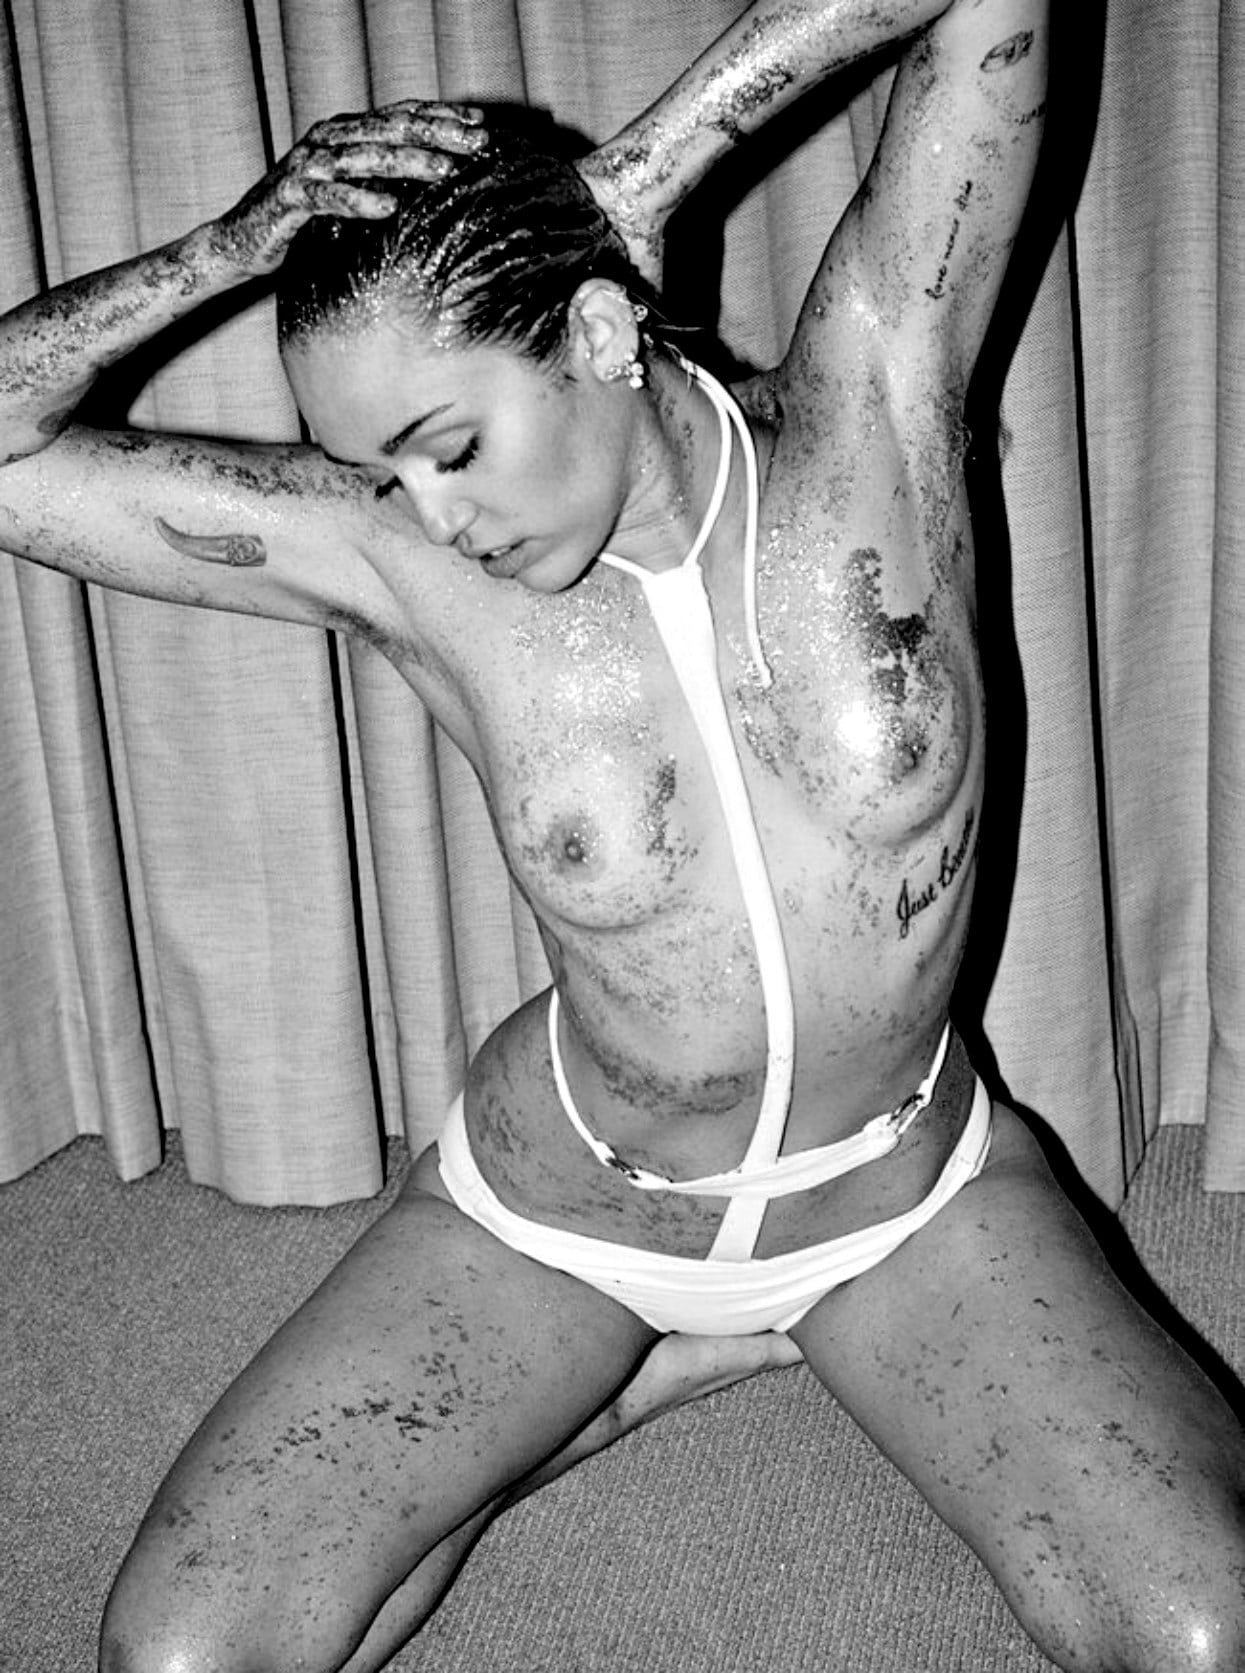 Miley Cyrus Fucked By Black - Miley Cyrus Nude Photo & Video Celebrity Collection